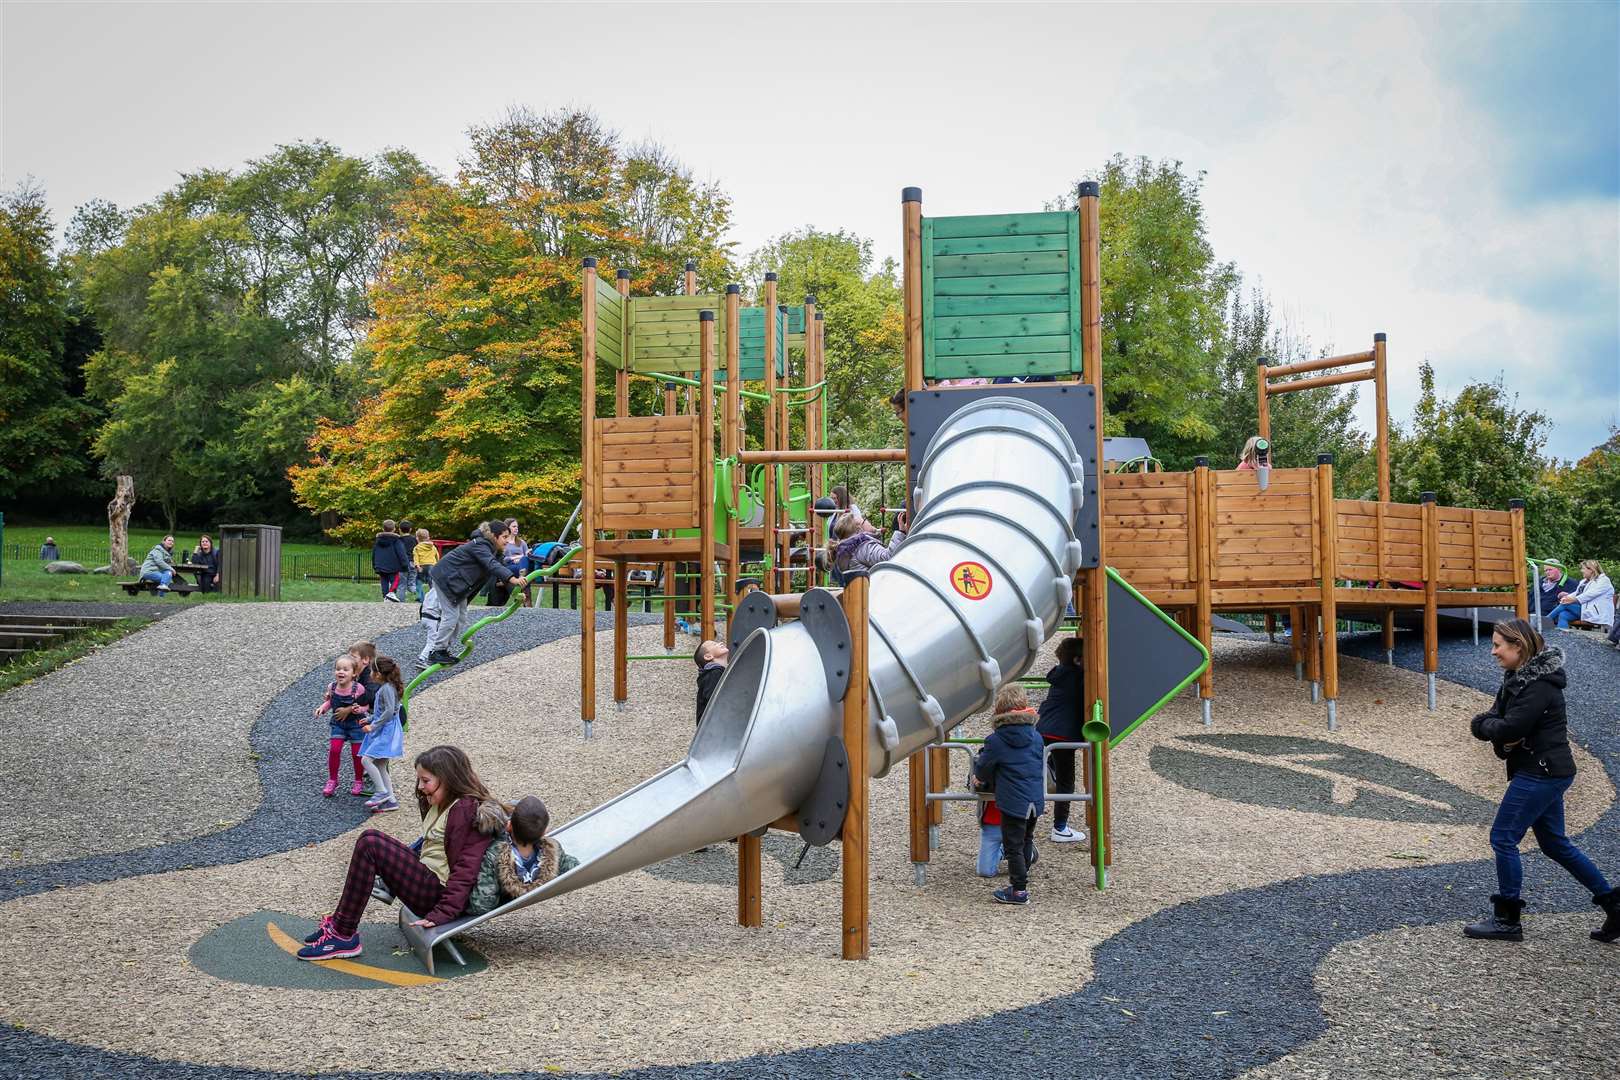 The playground, lakes and woodlands at Capstone Country Park gives kids plenty to do. Picture: Matthew Walker